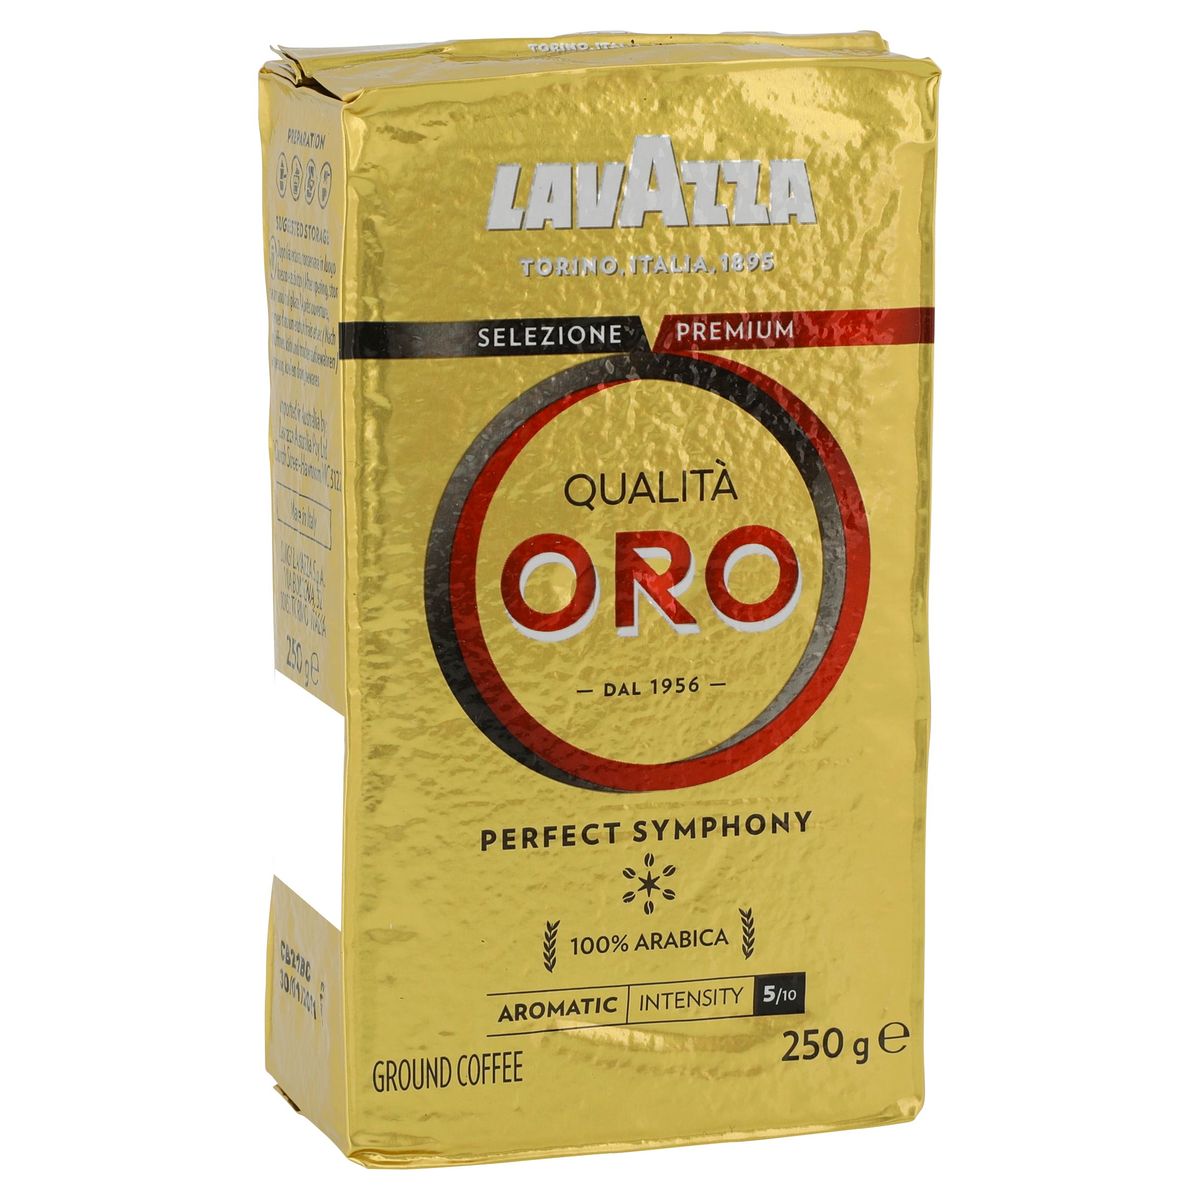 Lavazza Quality Oro fruity&floral intensity scale 5/10 250g